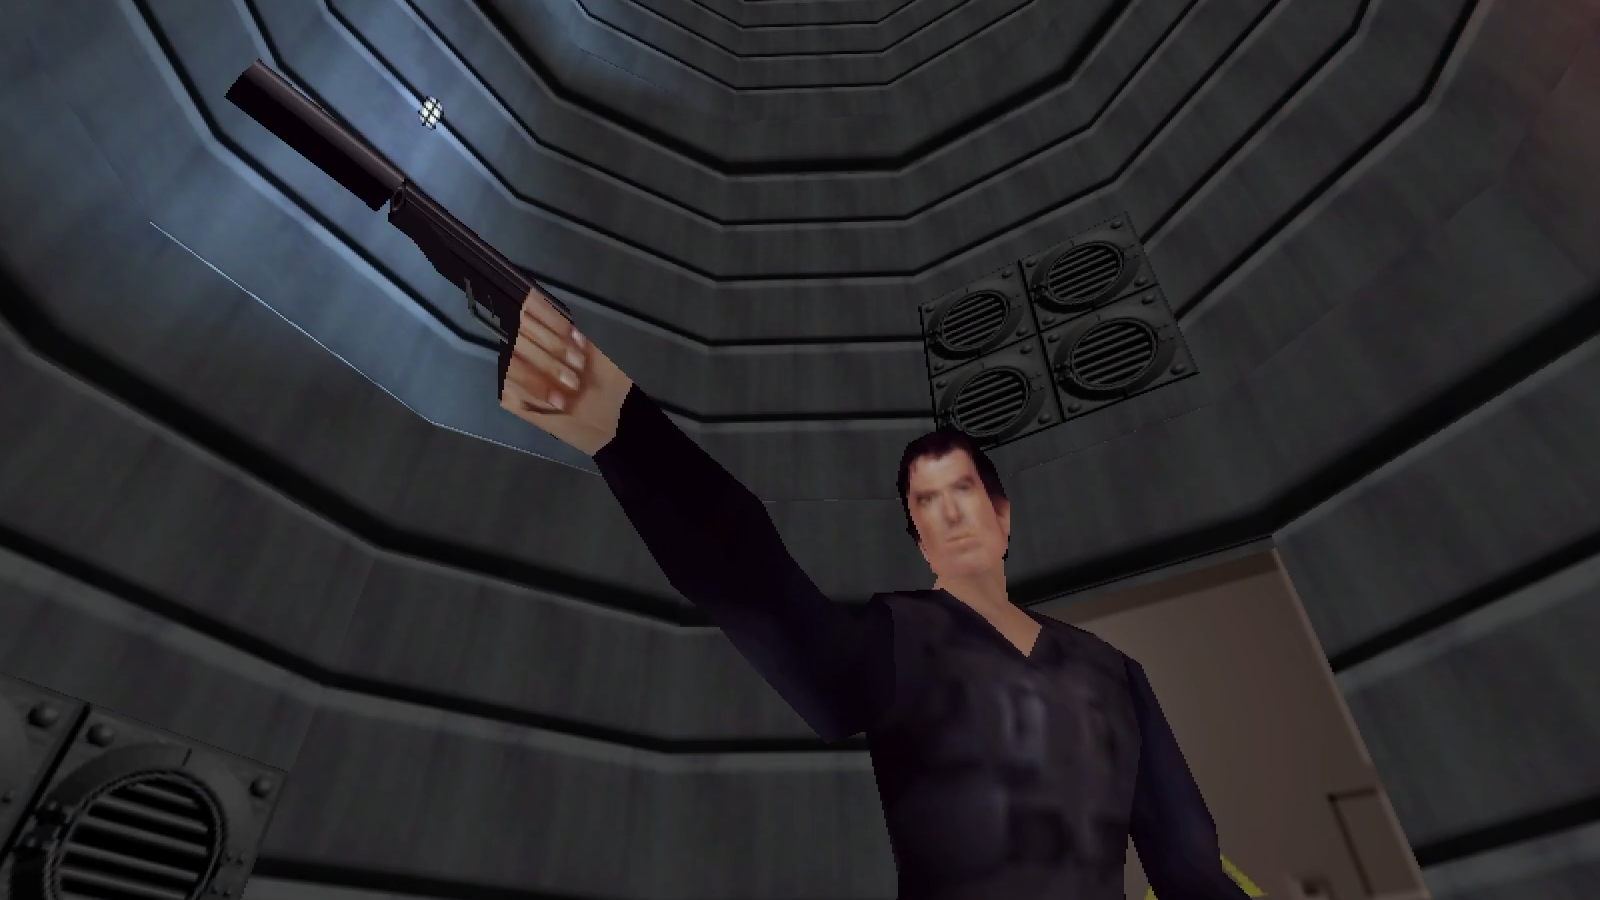 Polygonal James Bond 007 aiming at something in the distance and his hand isnt even holding the gun.